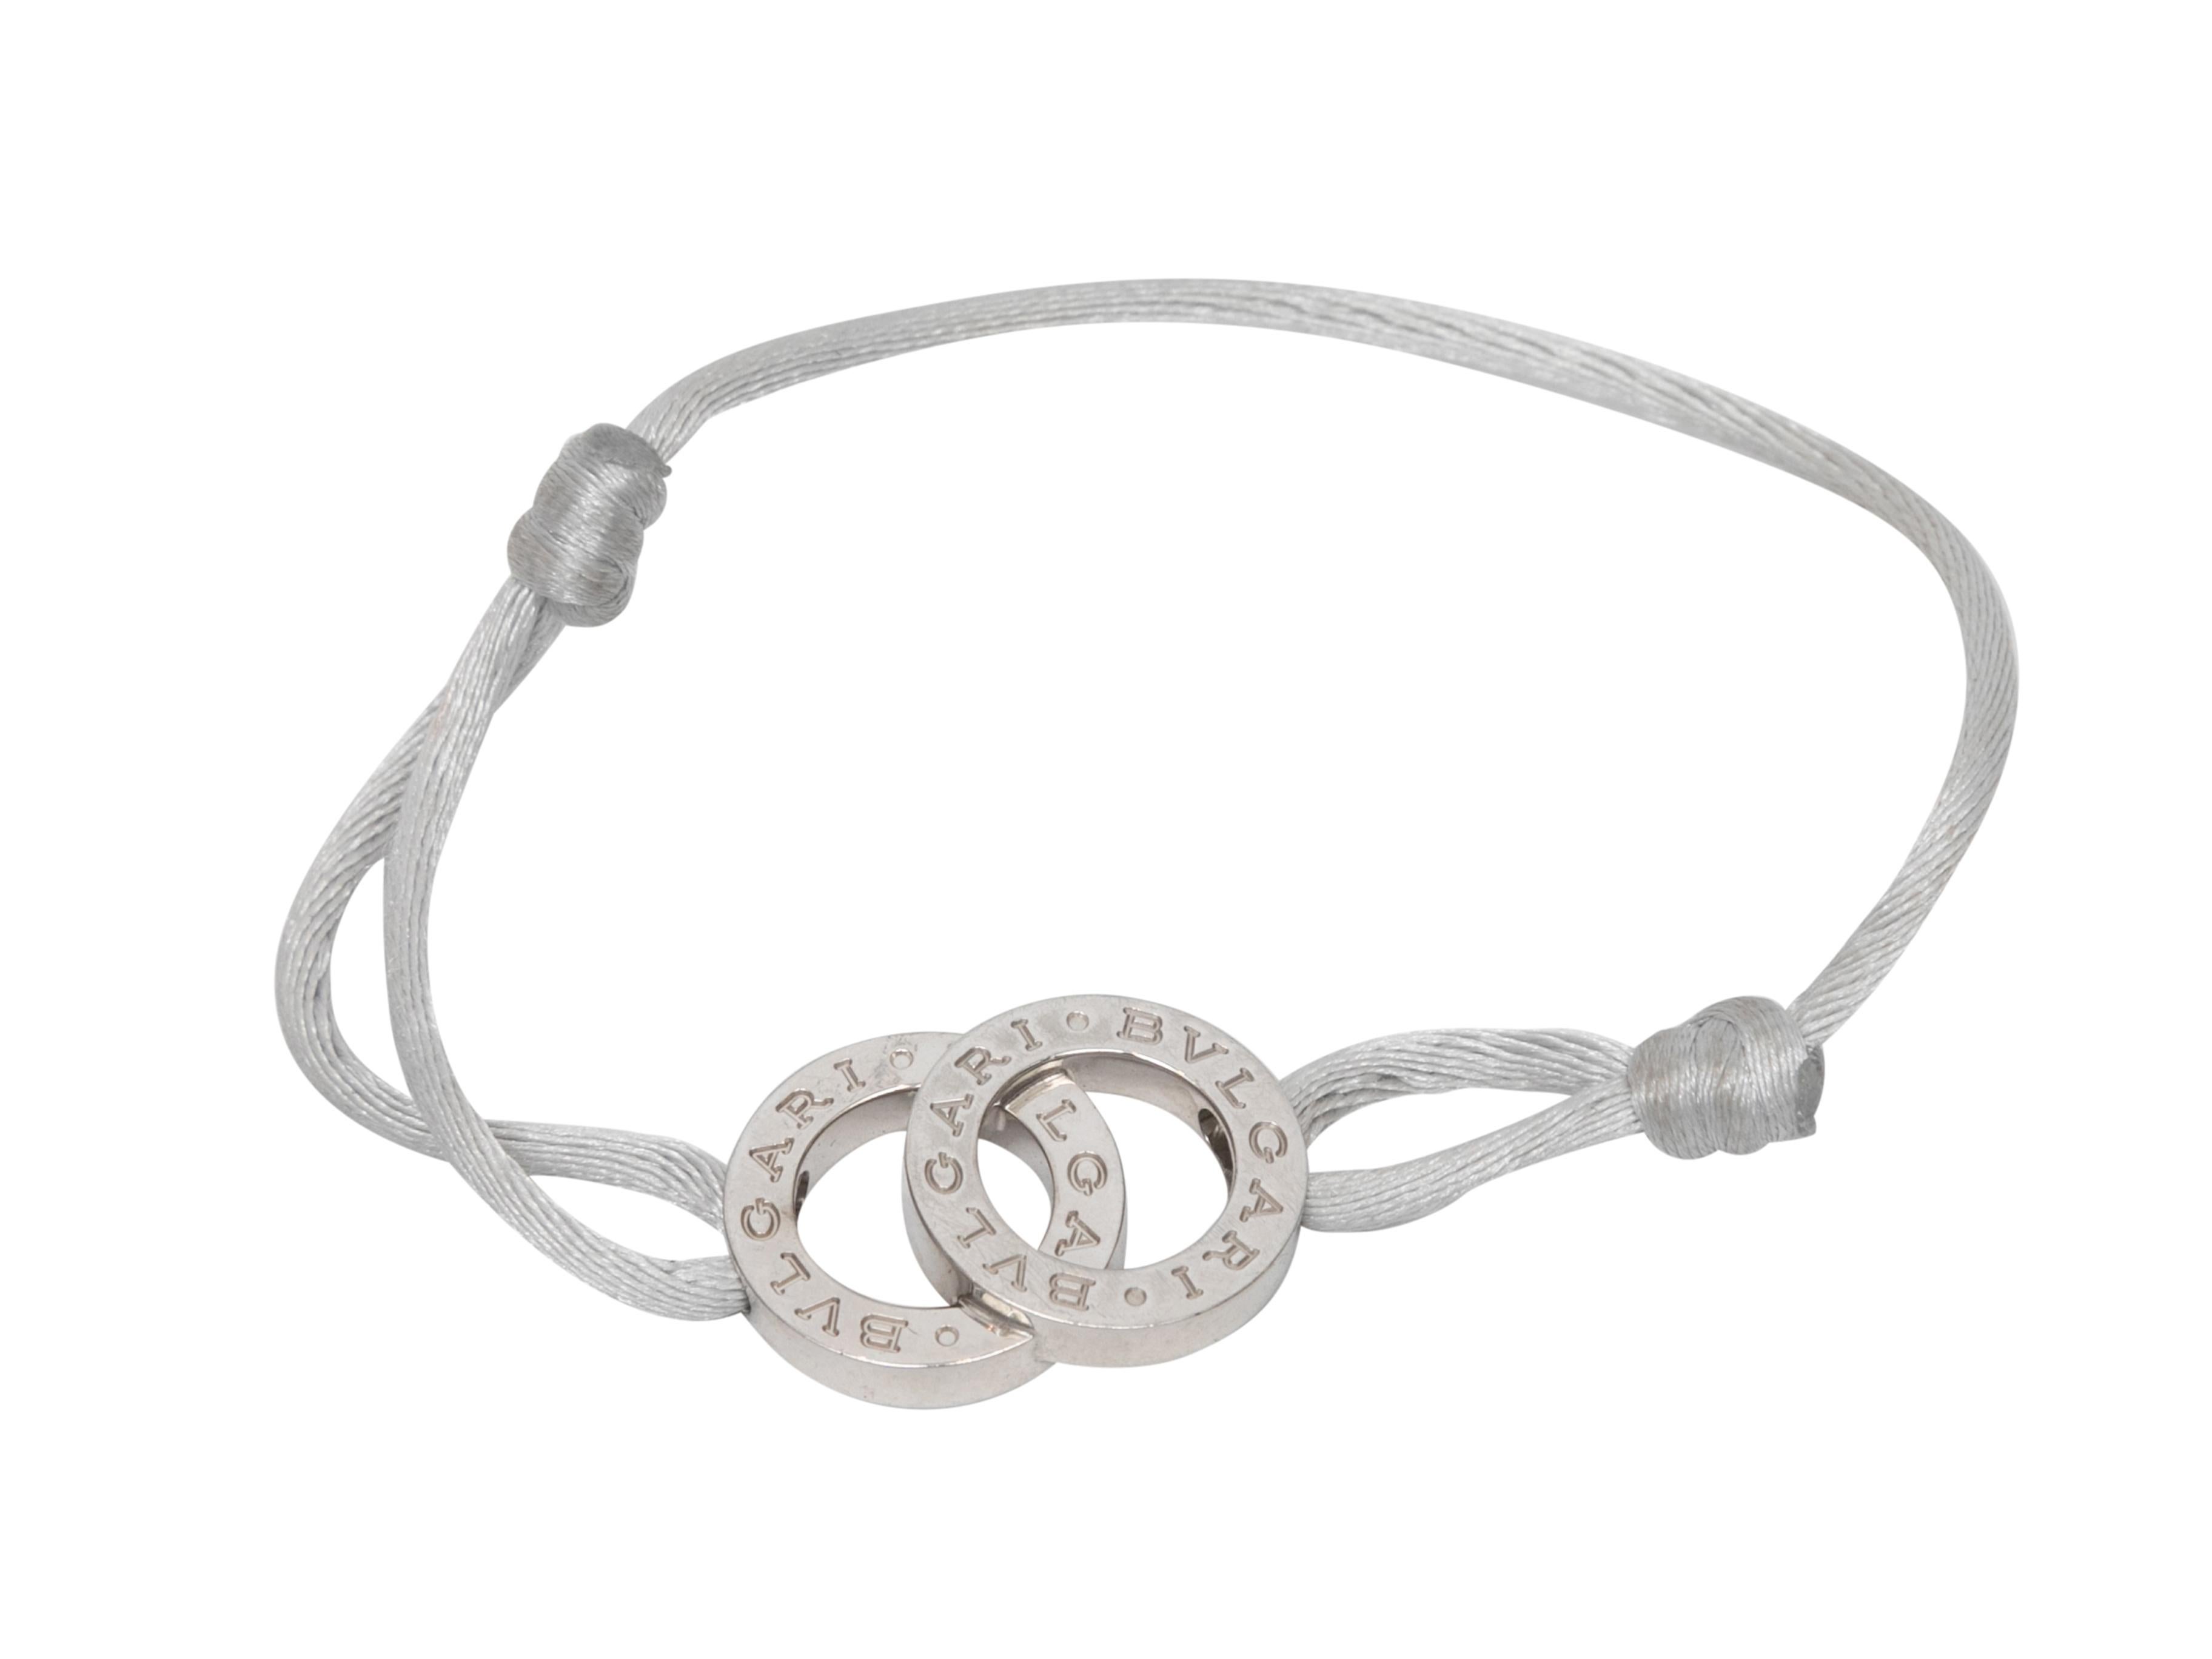  Silver and grey satin bracelet by Bvlgari. 0.1